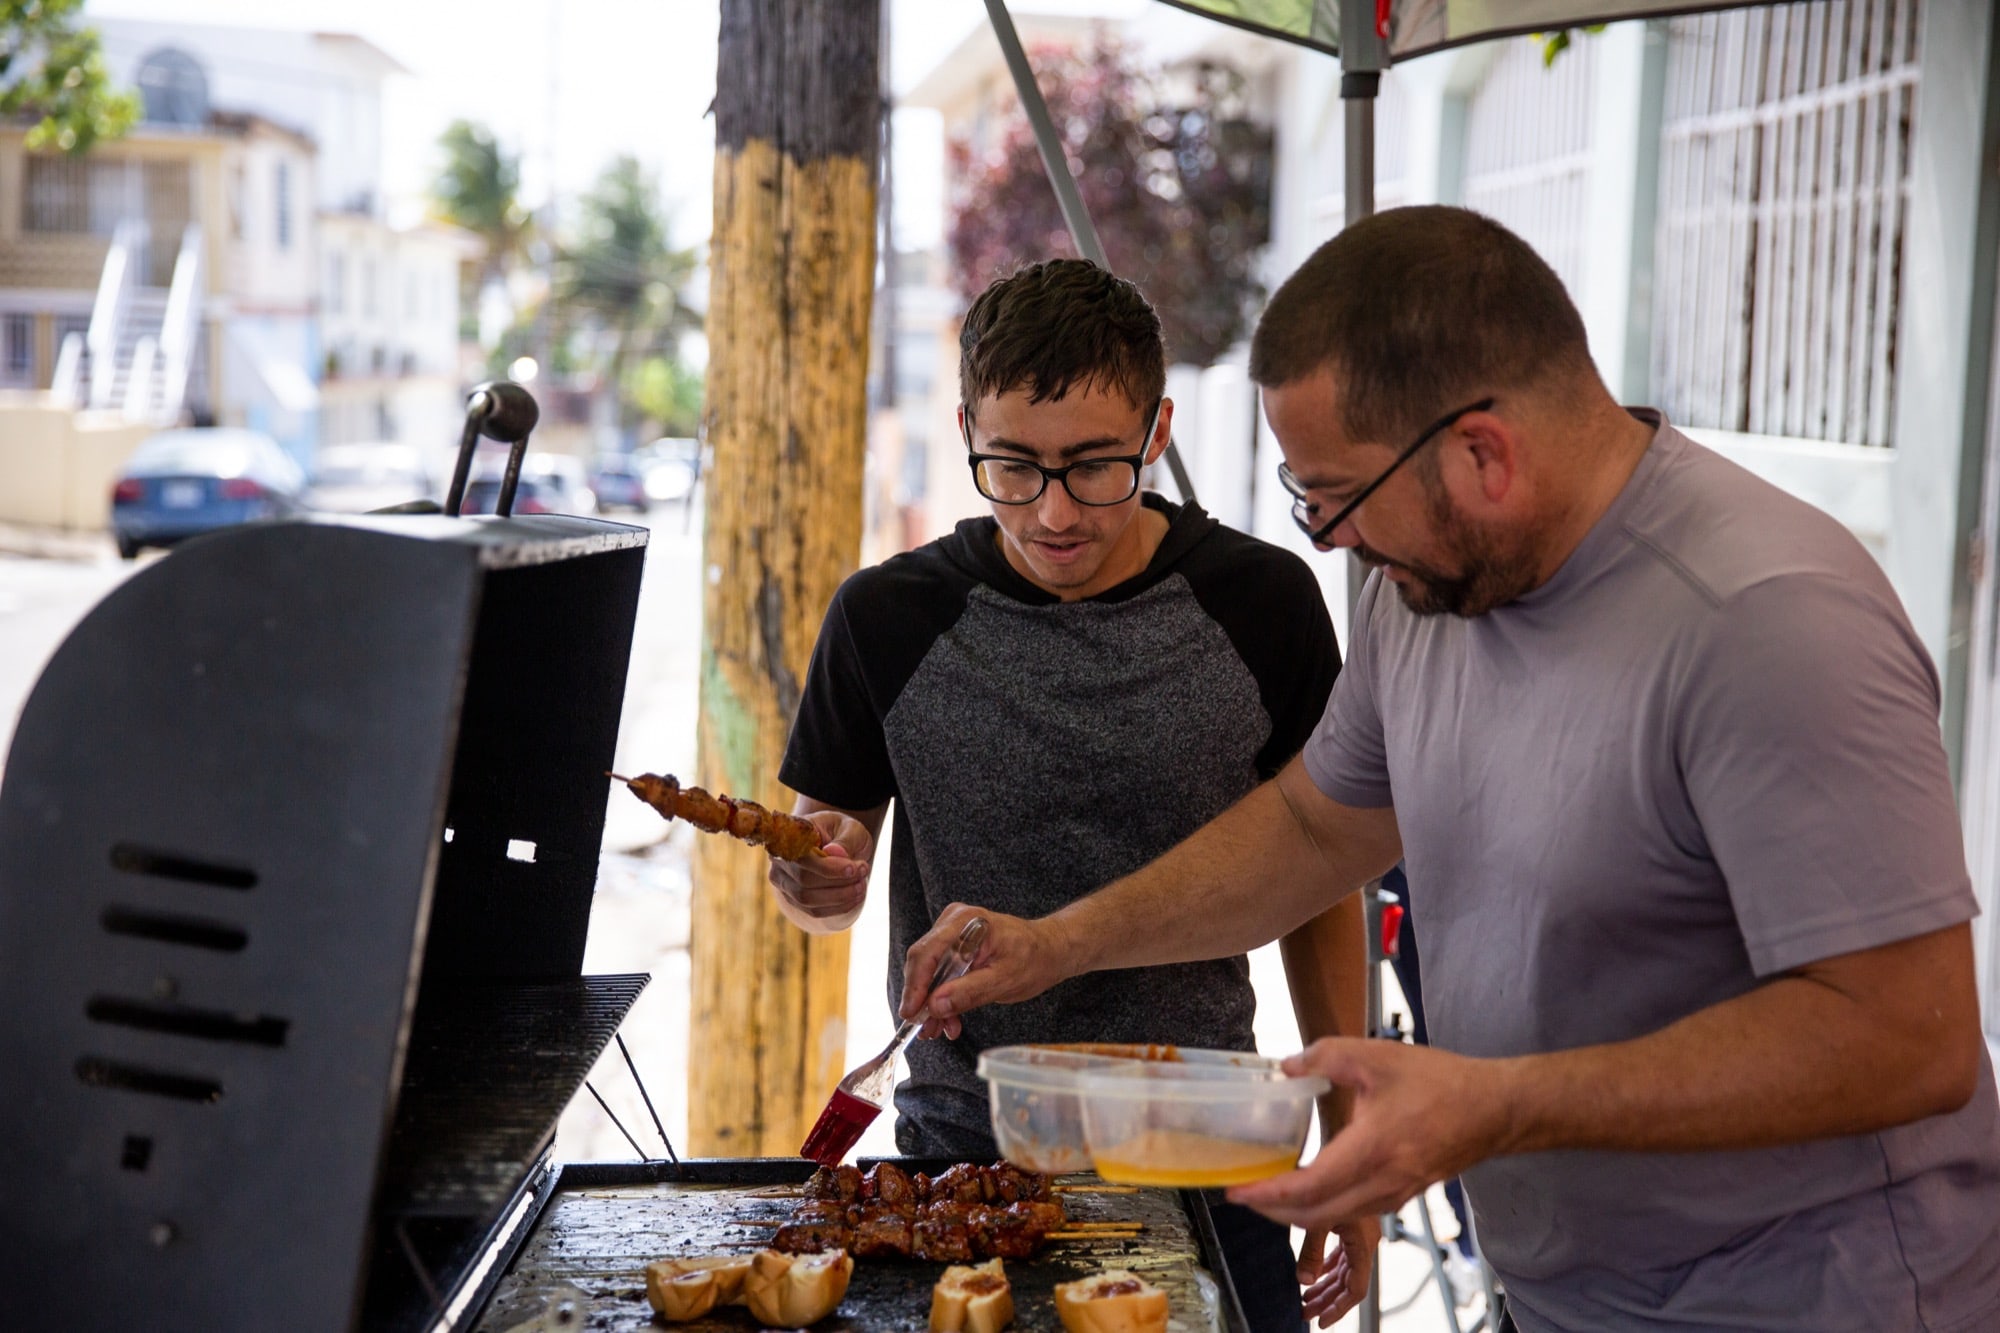 Ángel Morales Jr. (left) and his dad, Ángel Sr., make kebabs and hamburgers to sell in their neighborhood. The younger Morales said he tries not to think about the storm. (Ellen O'Brien/News21)